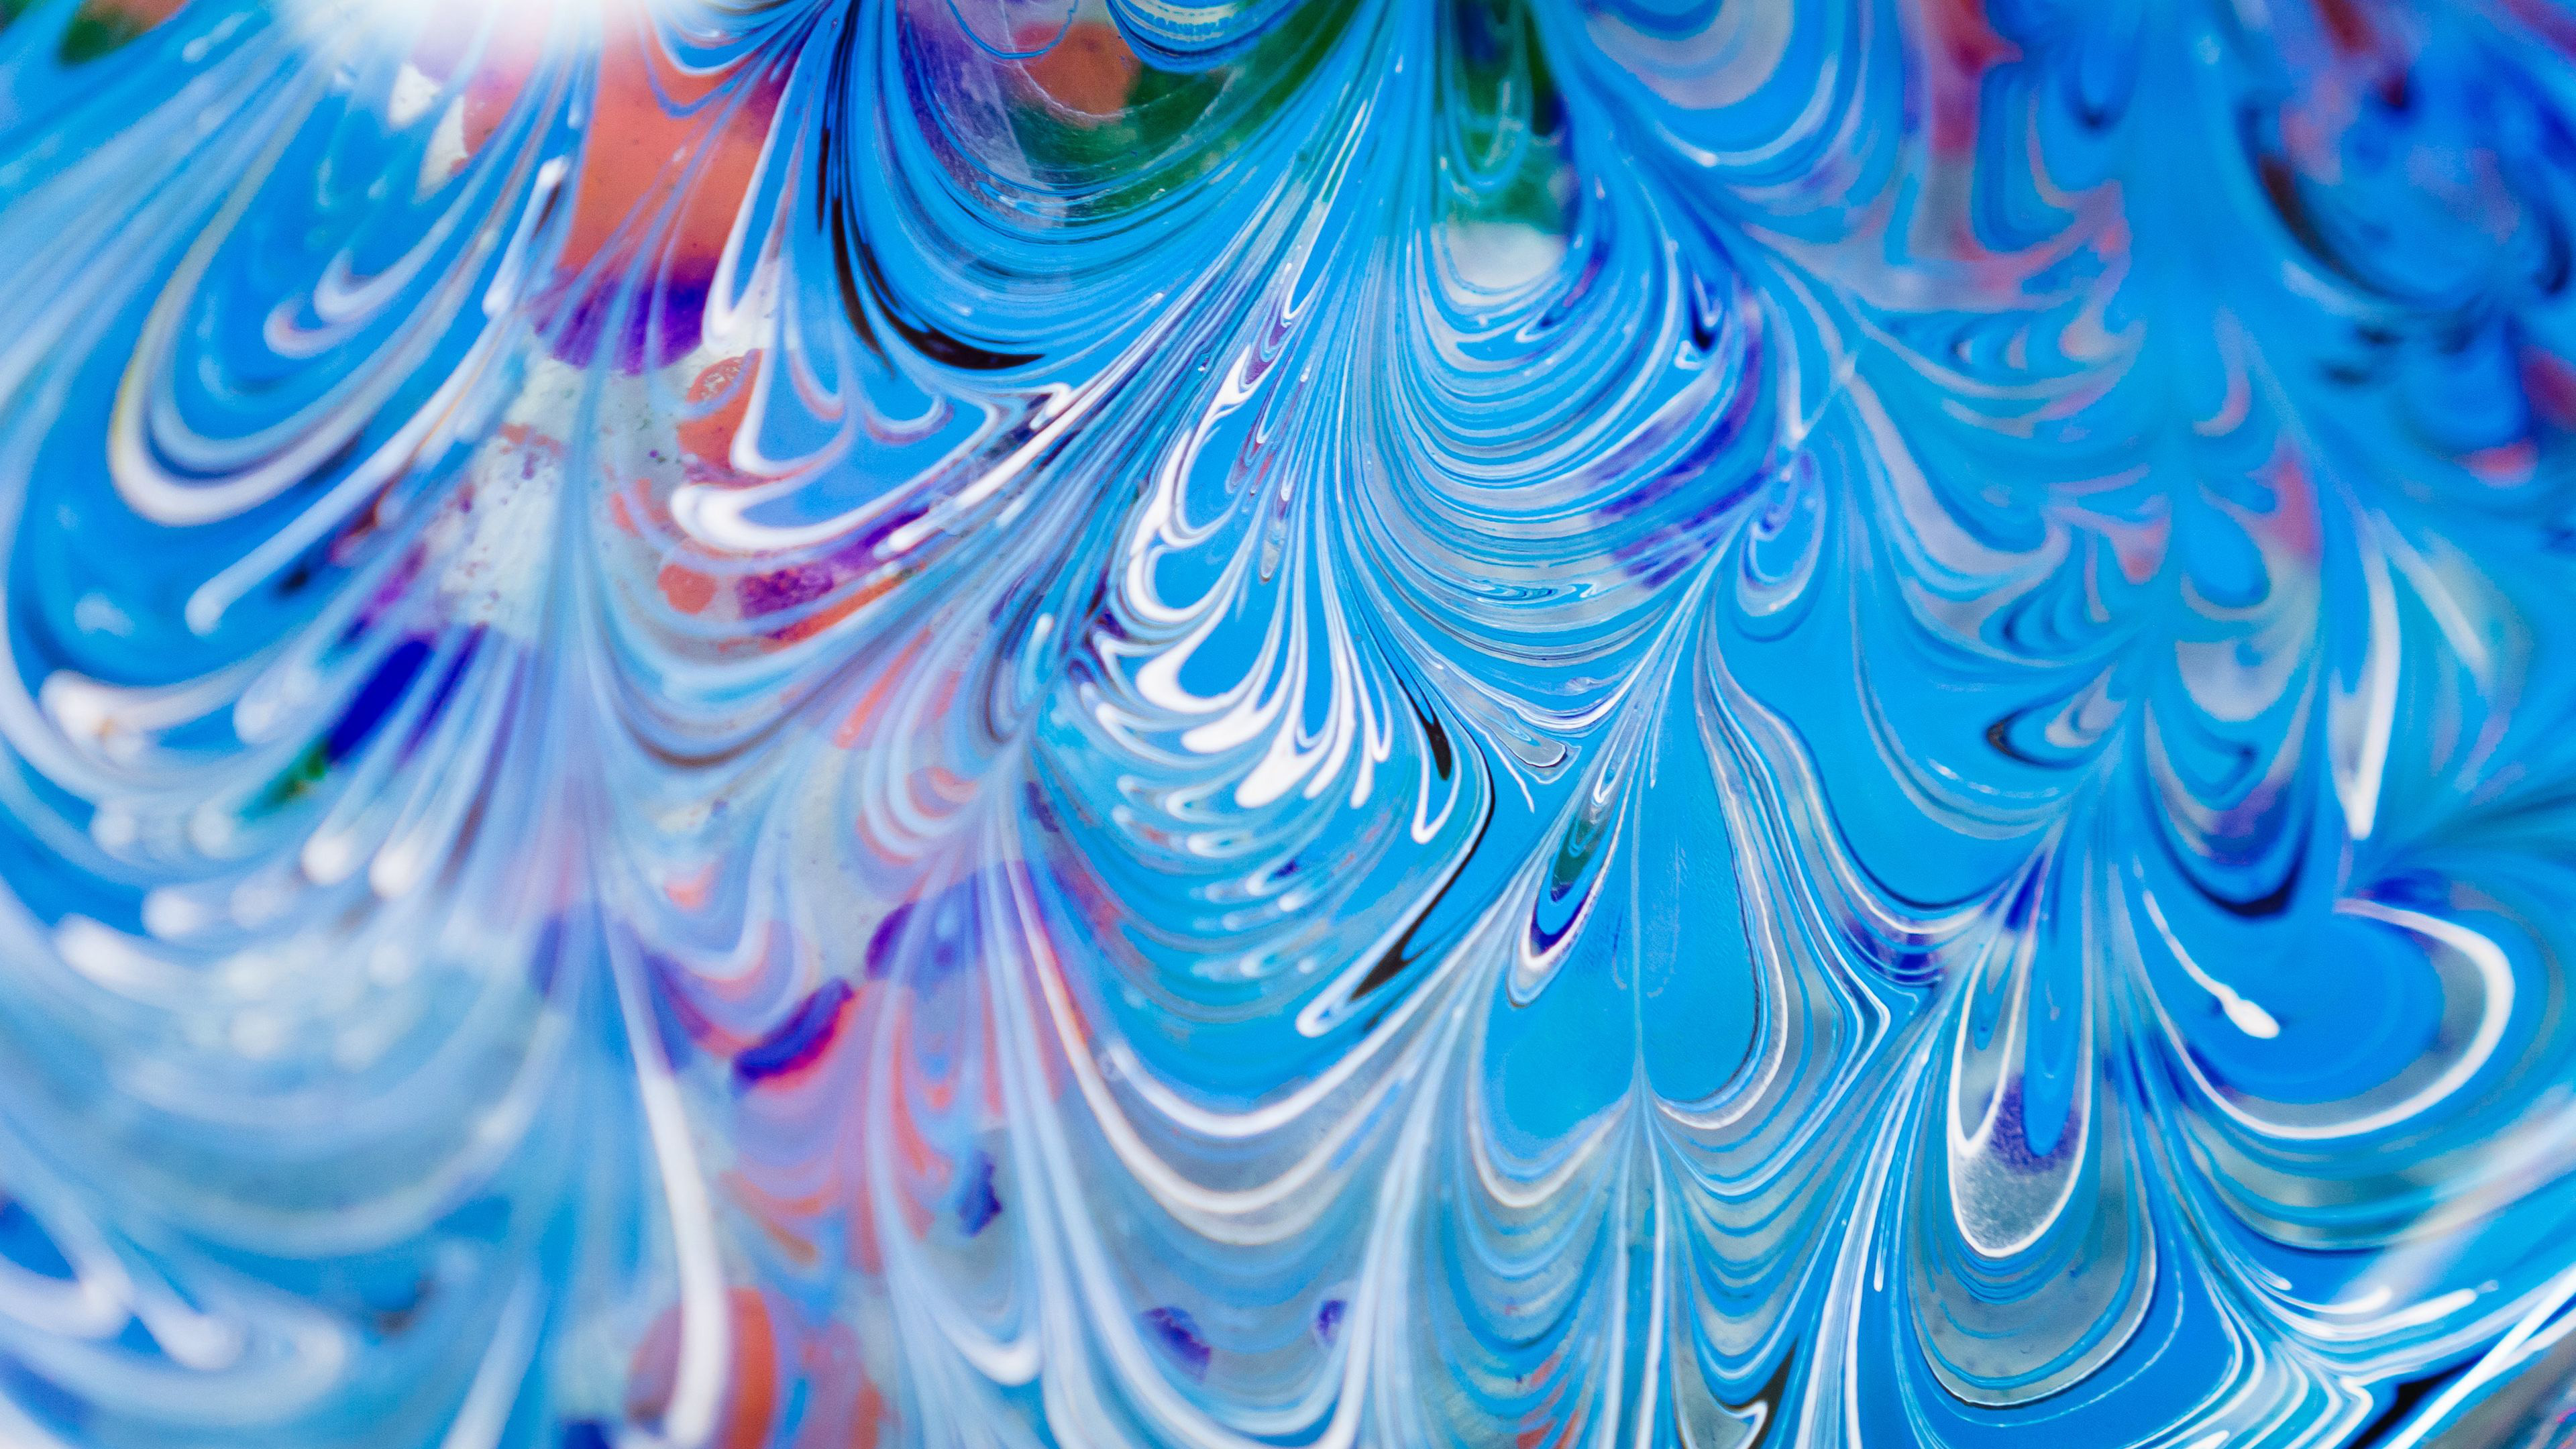 Abstract Blue 3840x2160